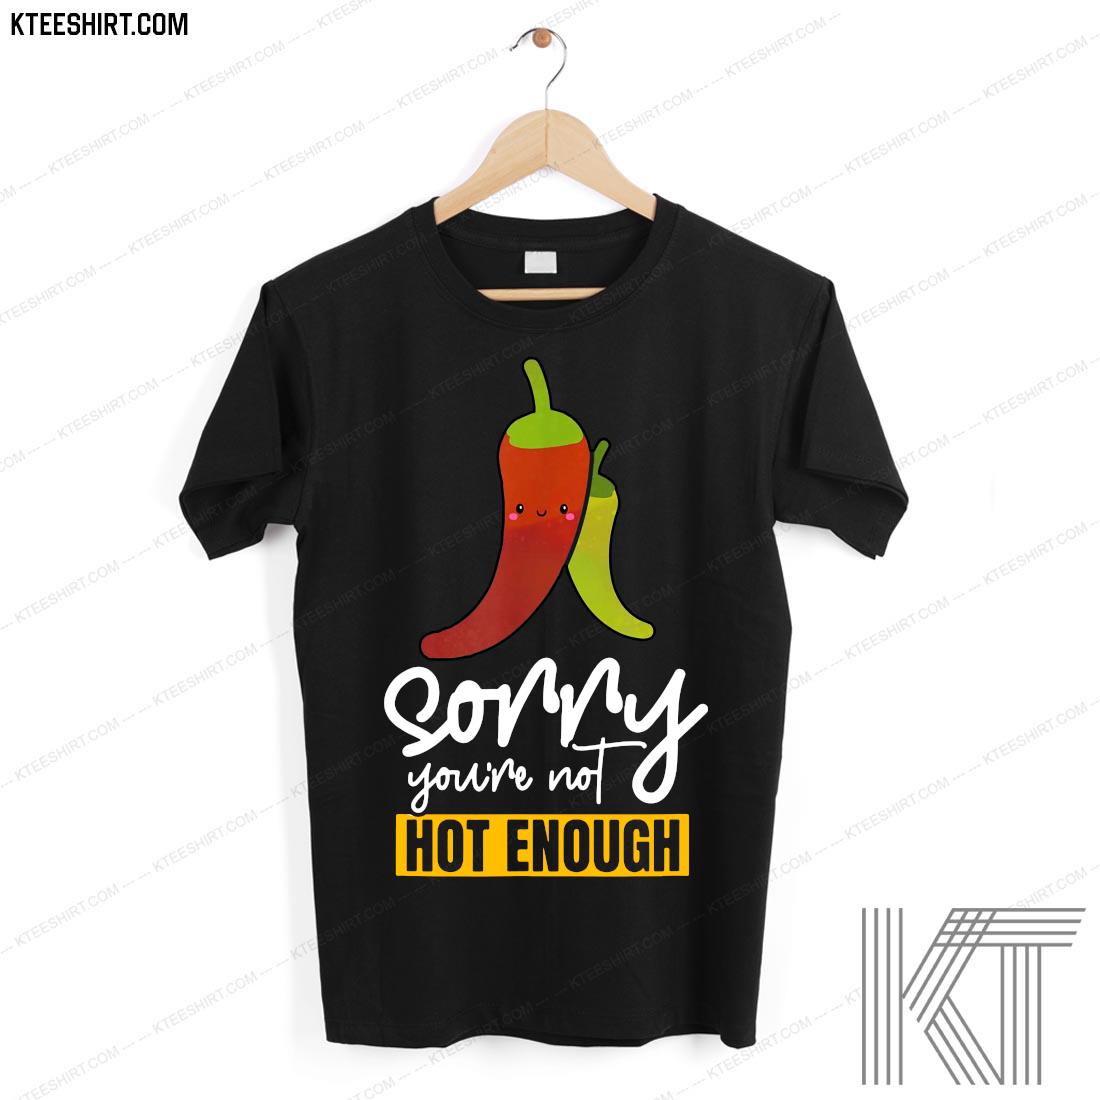 2021 Sorry You Are Not Hot Enough Funny Humorous Shirt